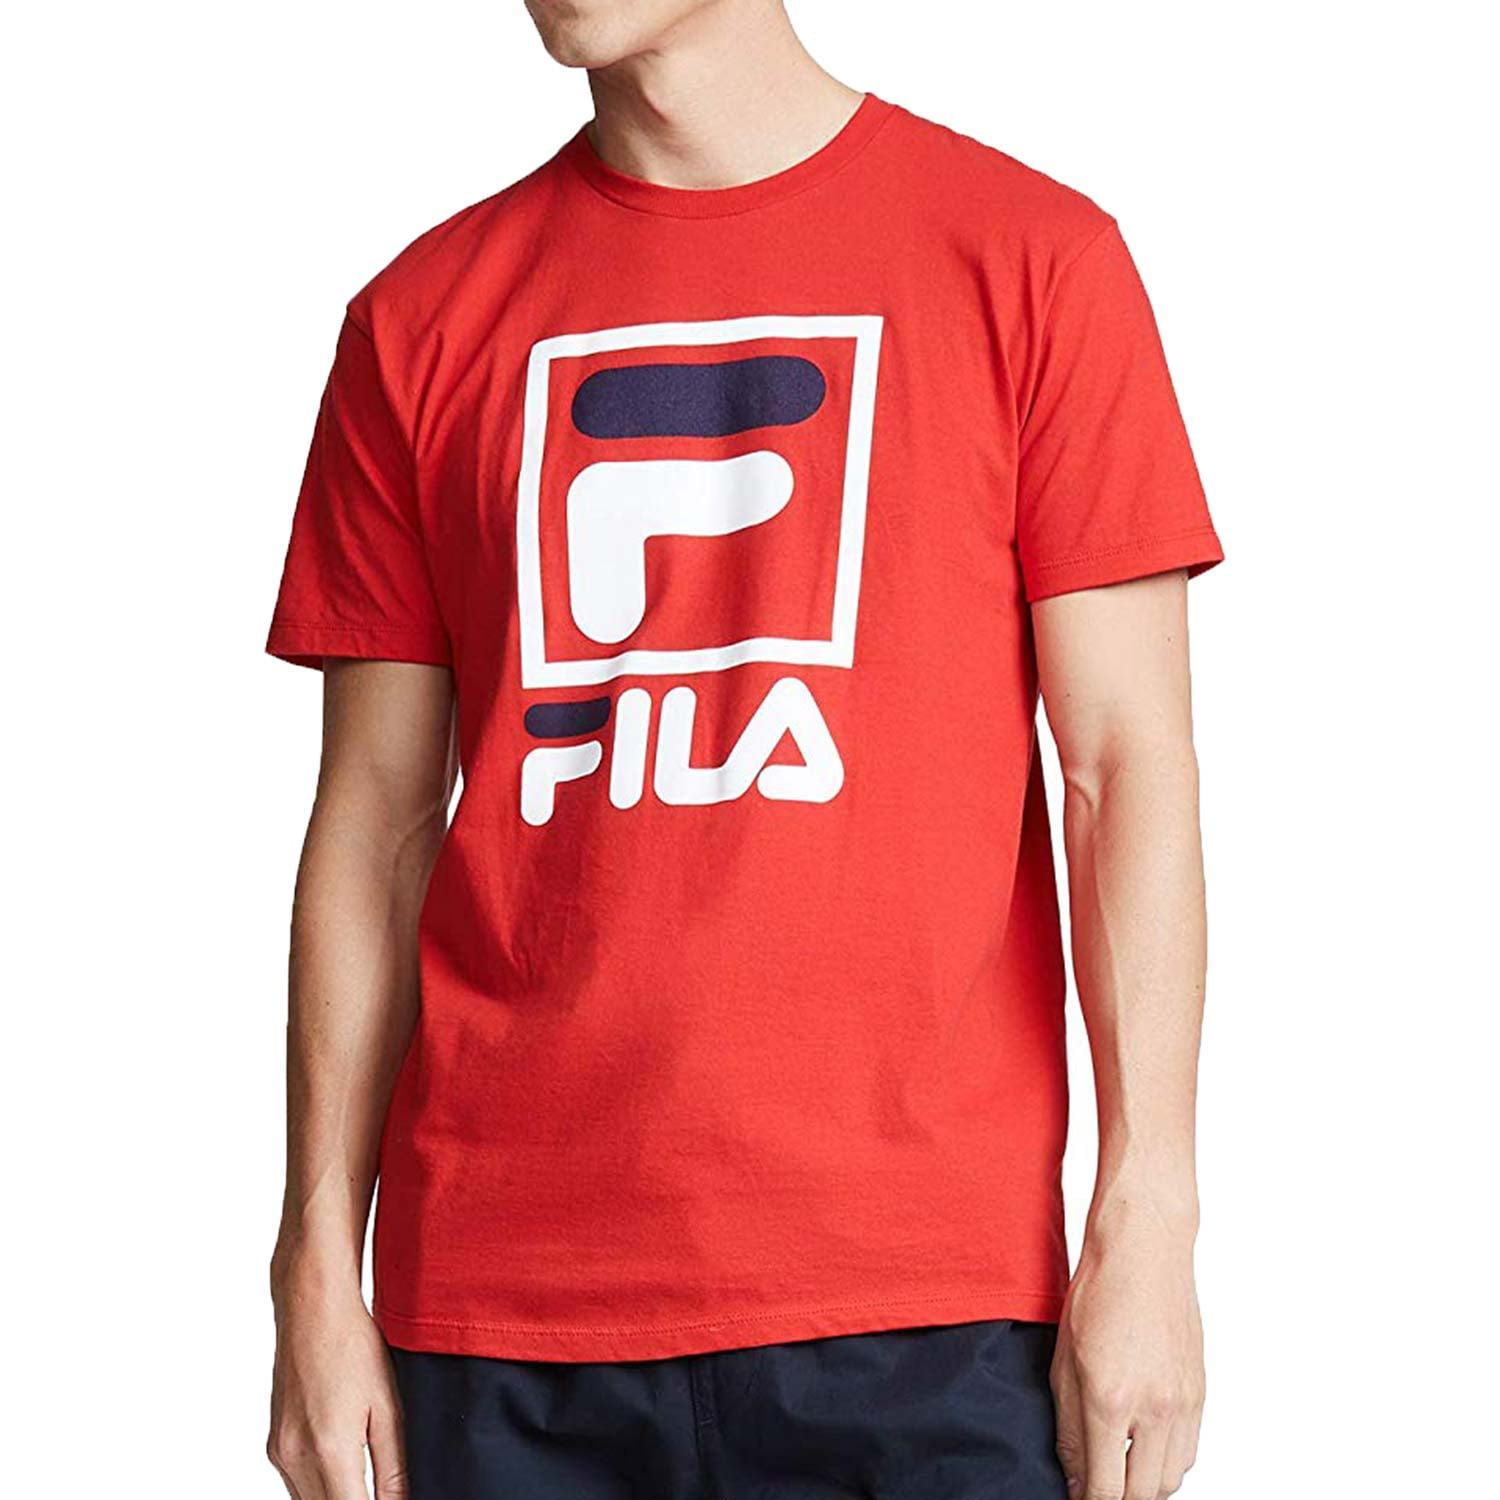 Fila Men's Stacked Tee Shirt Chinese Red-White-Navy lm163xf4-622 -